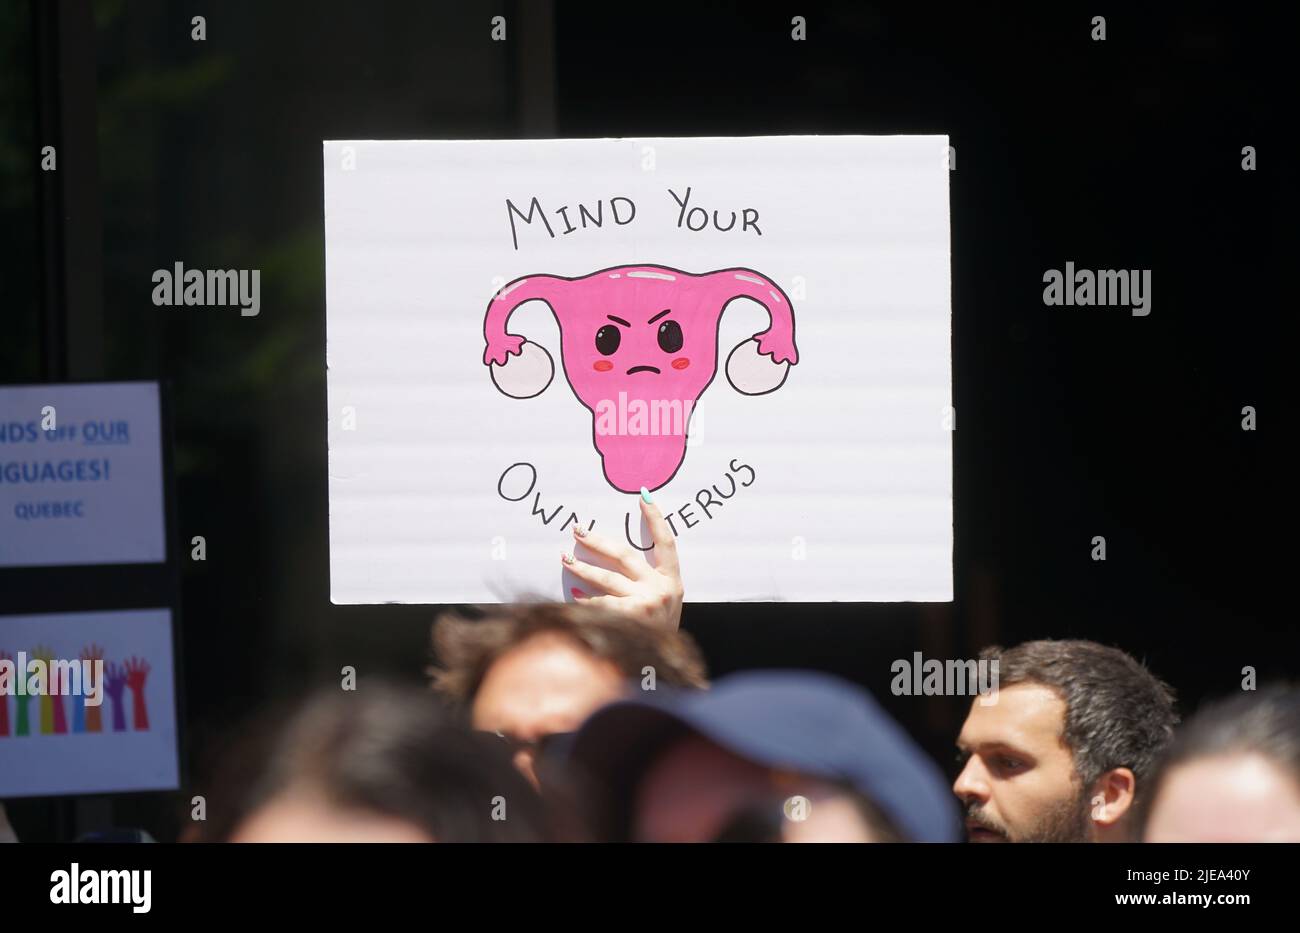 Pro-choice protest demonstration in downtown Montreal.Quebec,Canada.Alamy Live News/Mario Beauregard Stock Photo